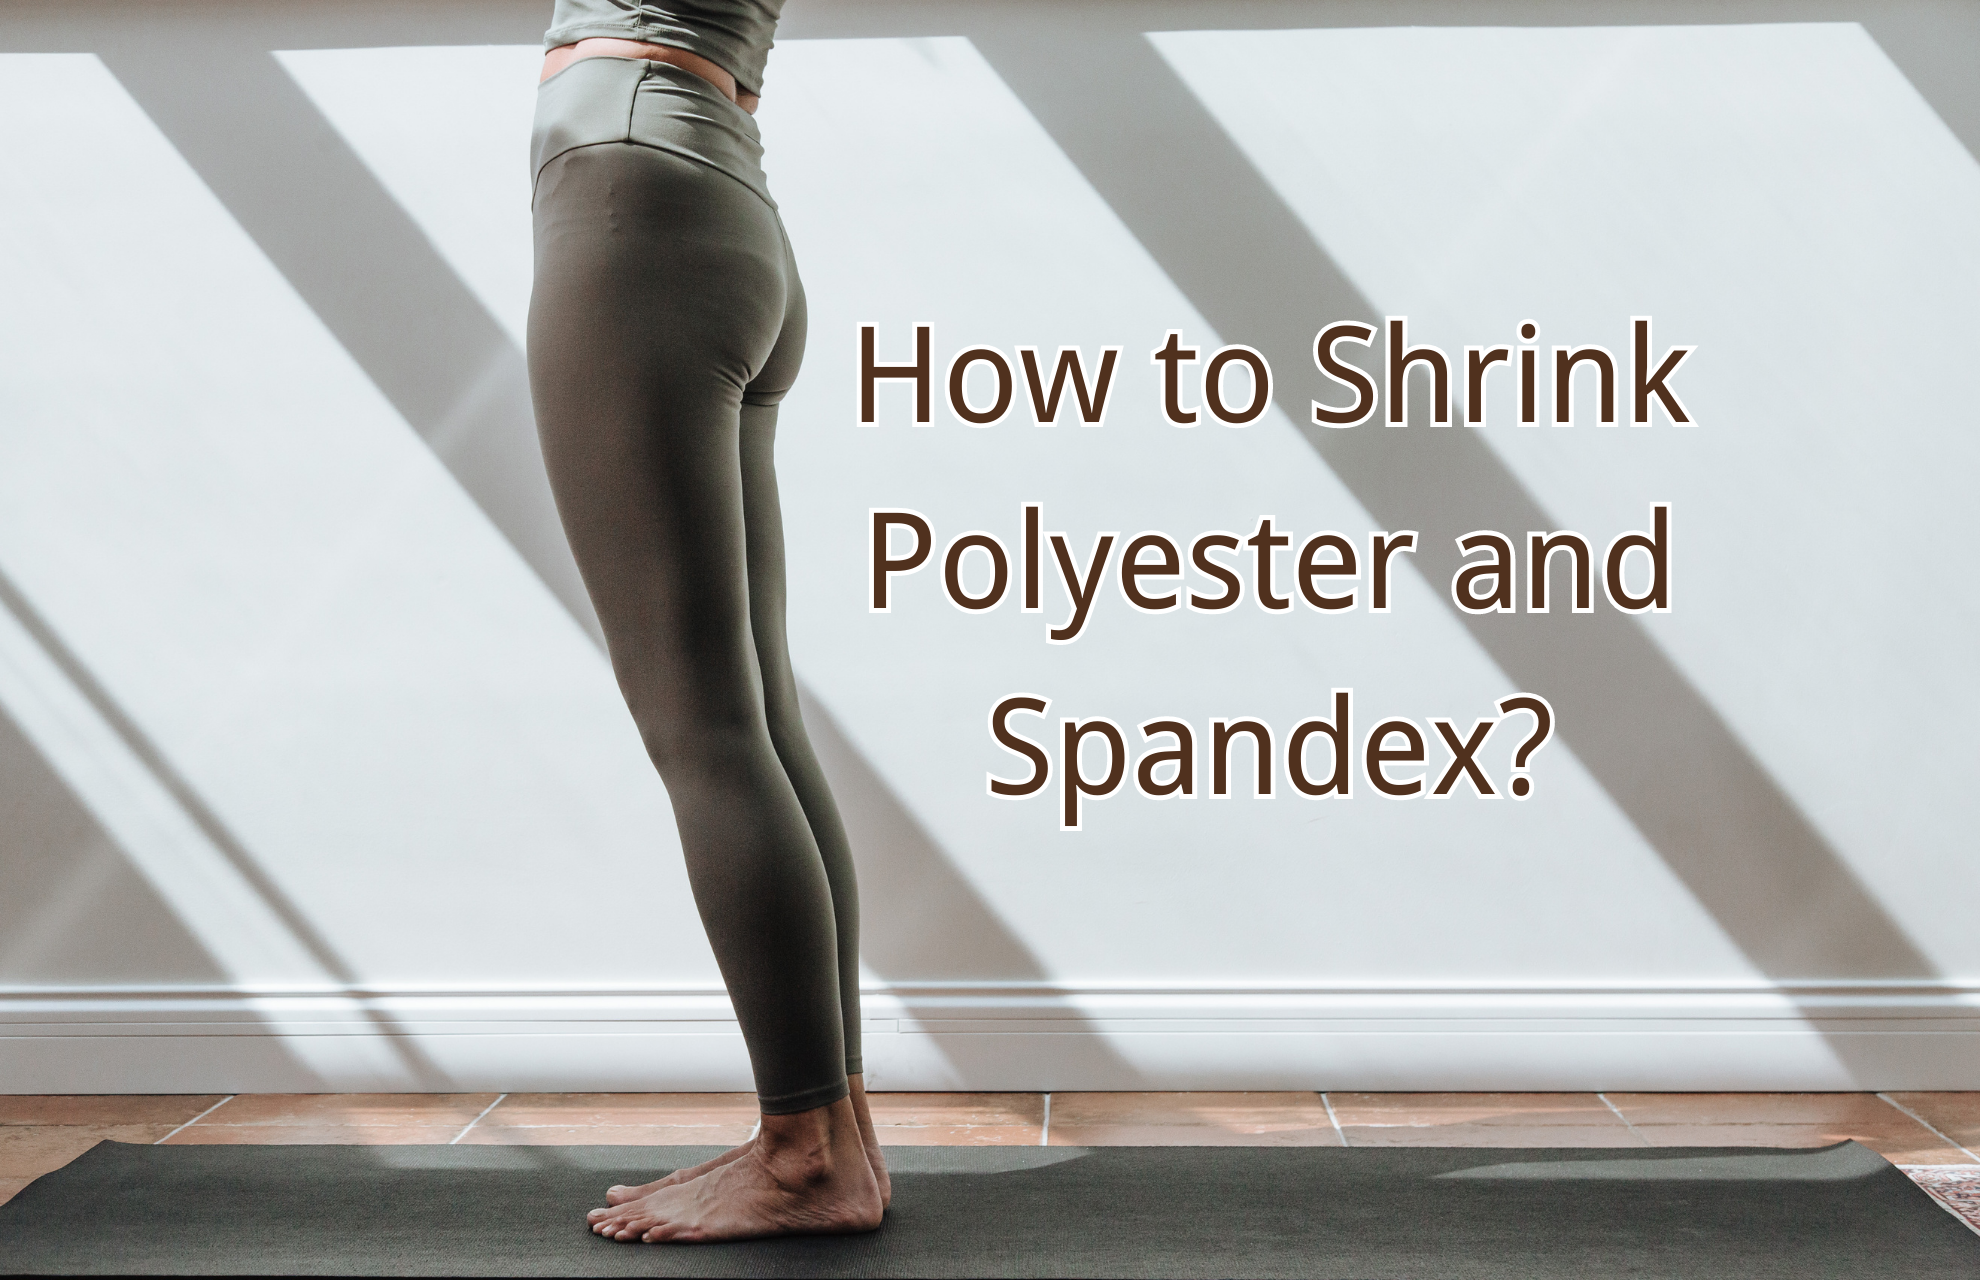 How to Shrink Polyester and Spandex? An Easy Beginner's Guide